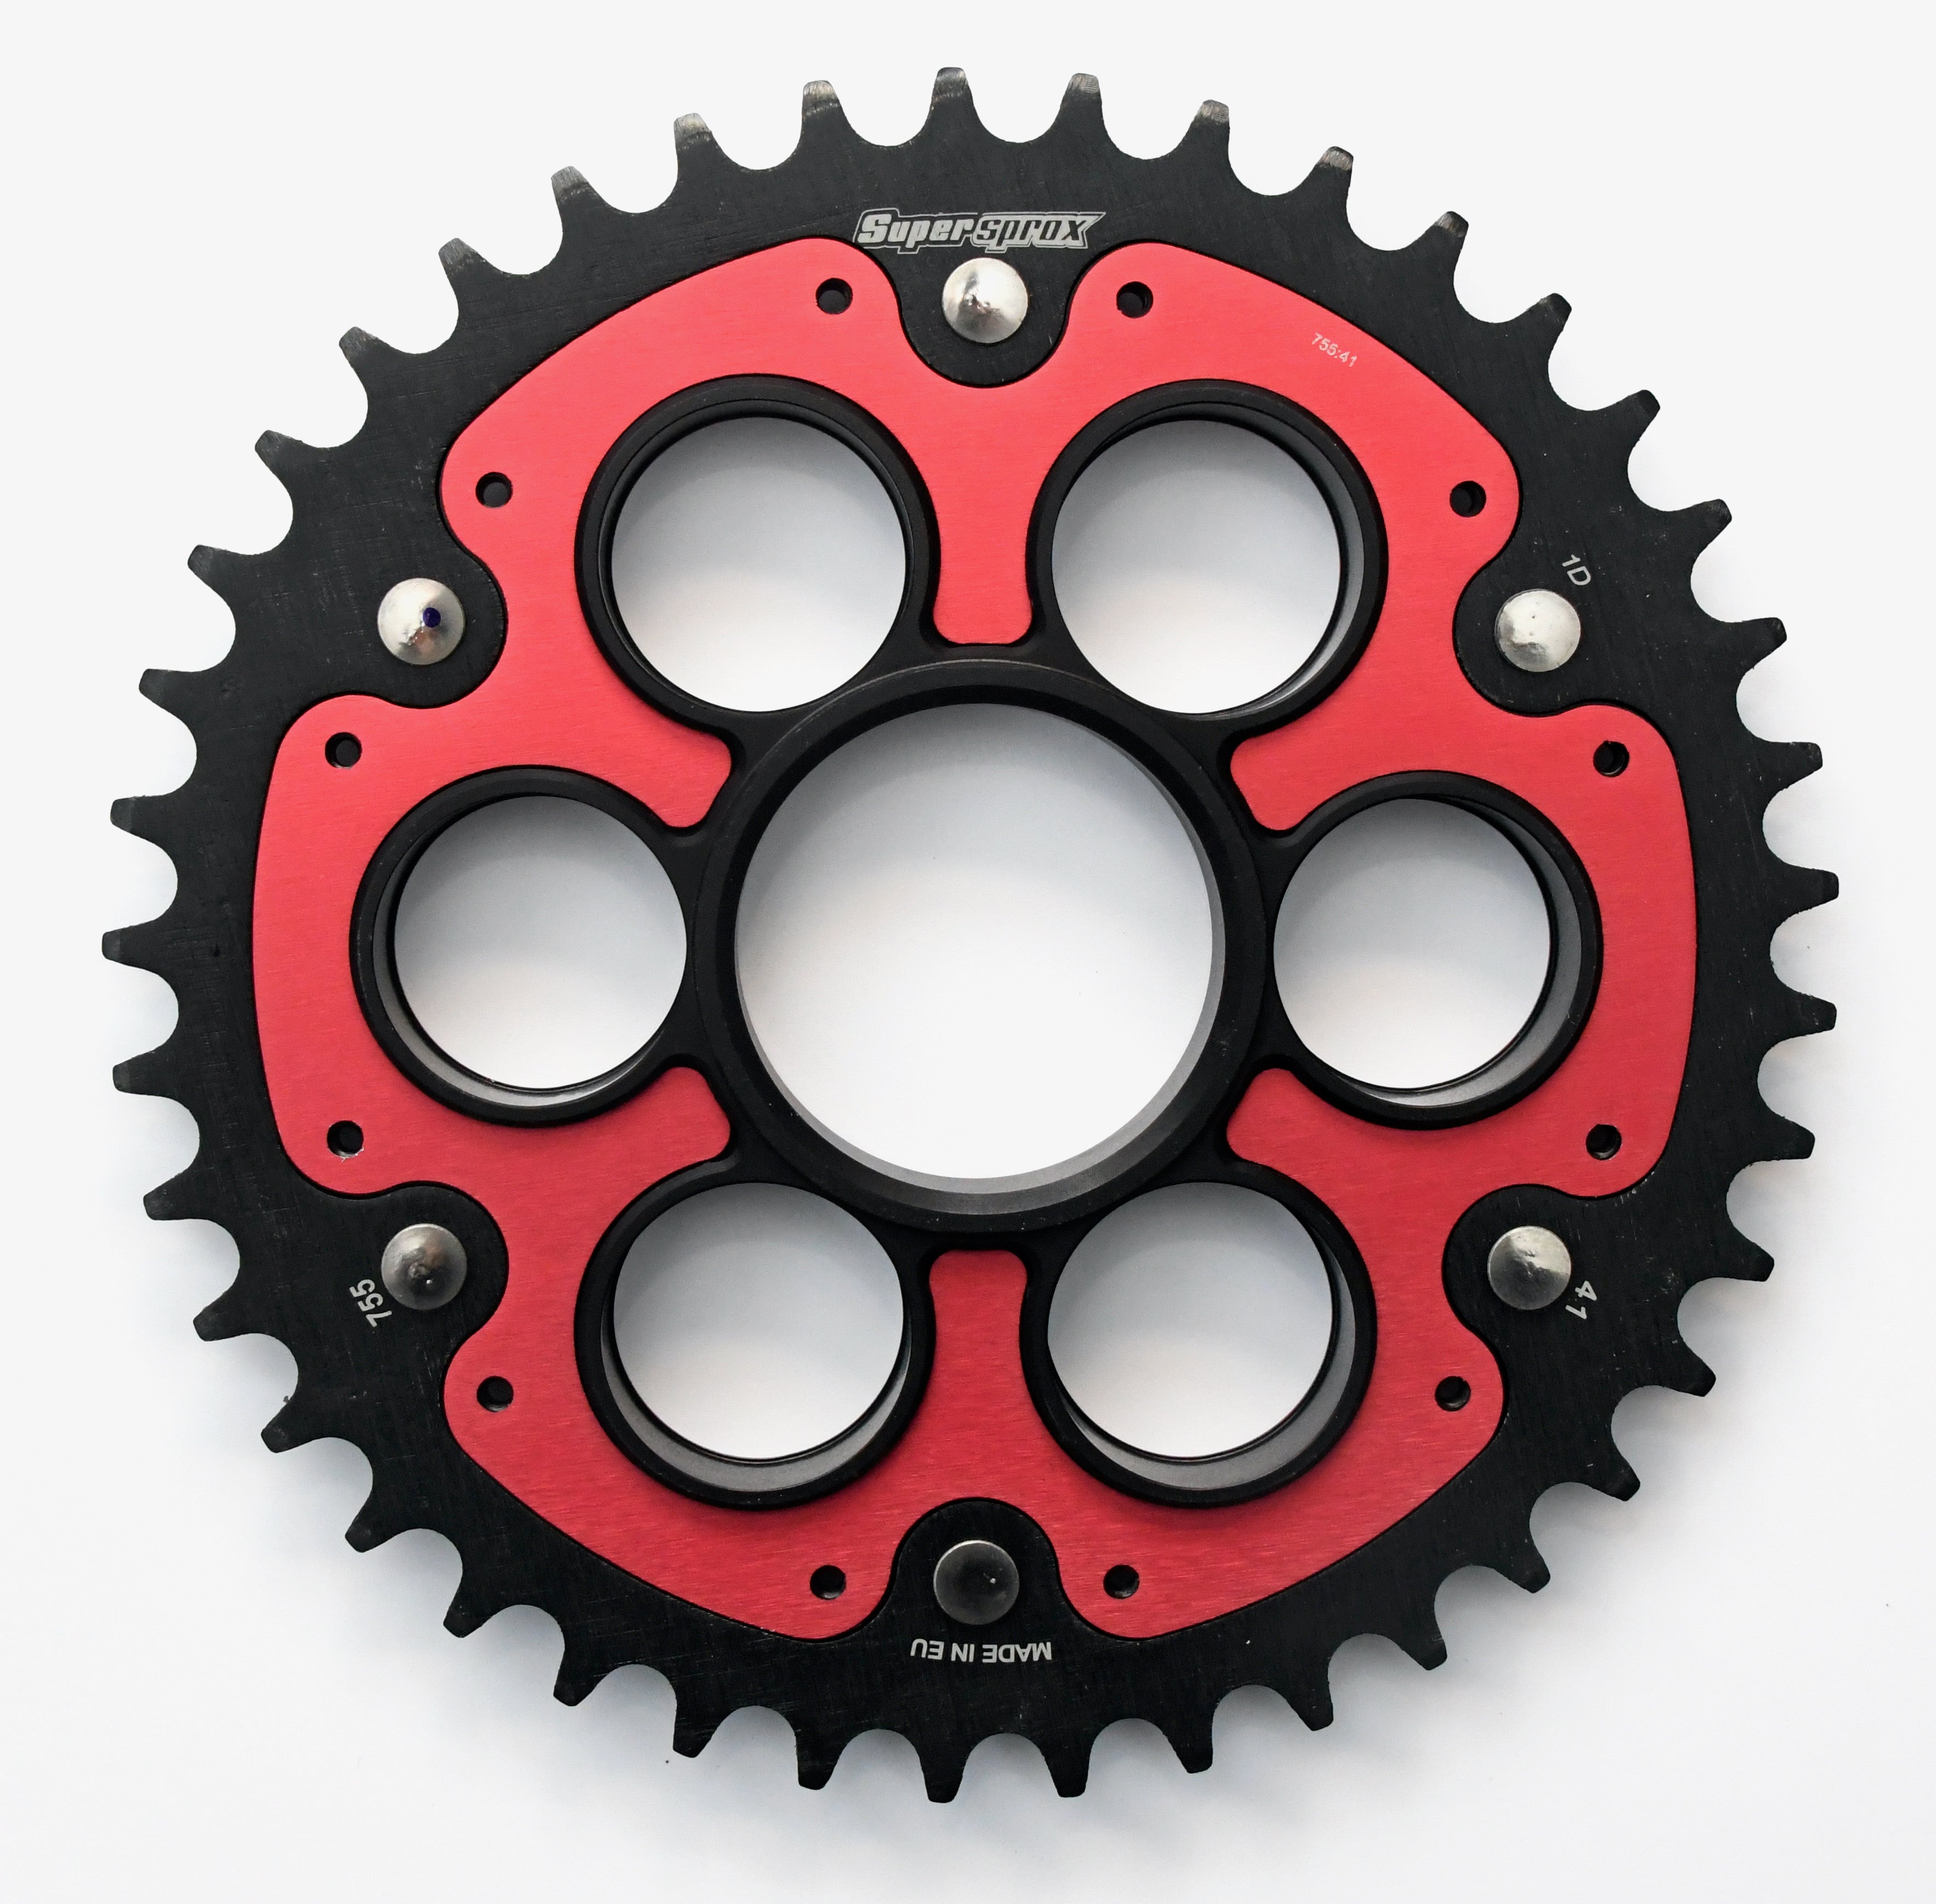 Supersprox Edge Stealth Rear Sprocket RSA-755_525 - Choose Your Gearing